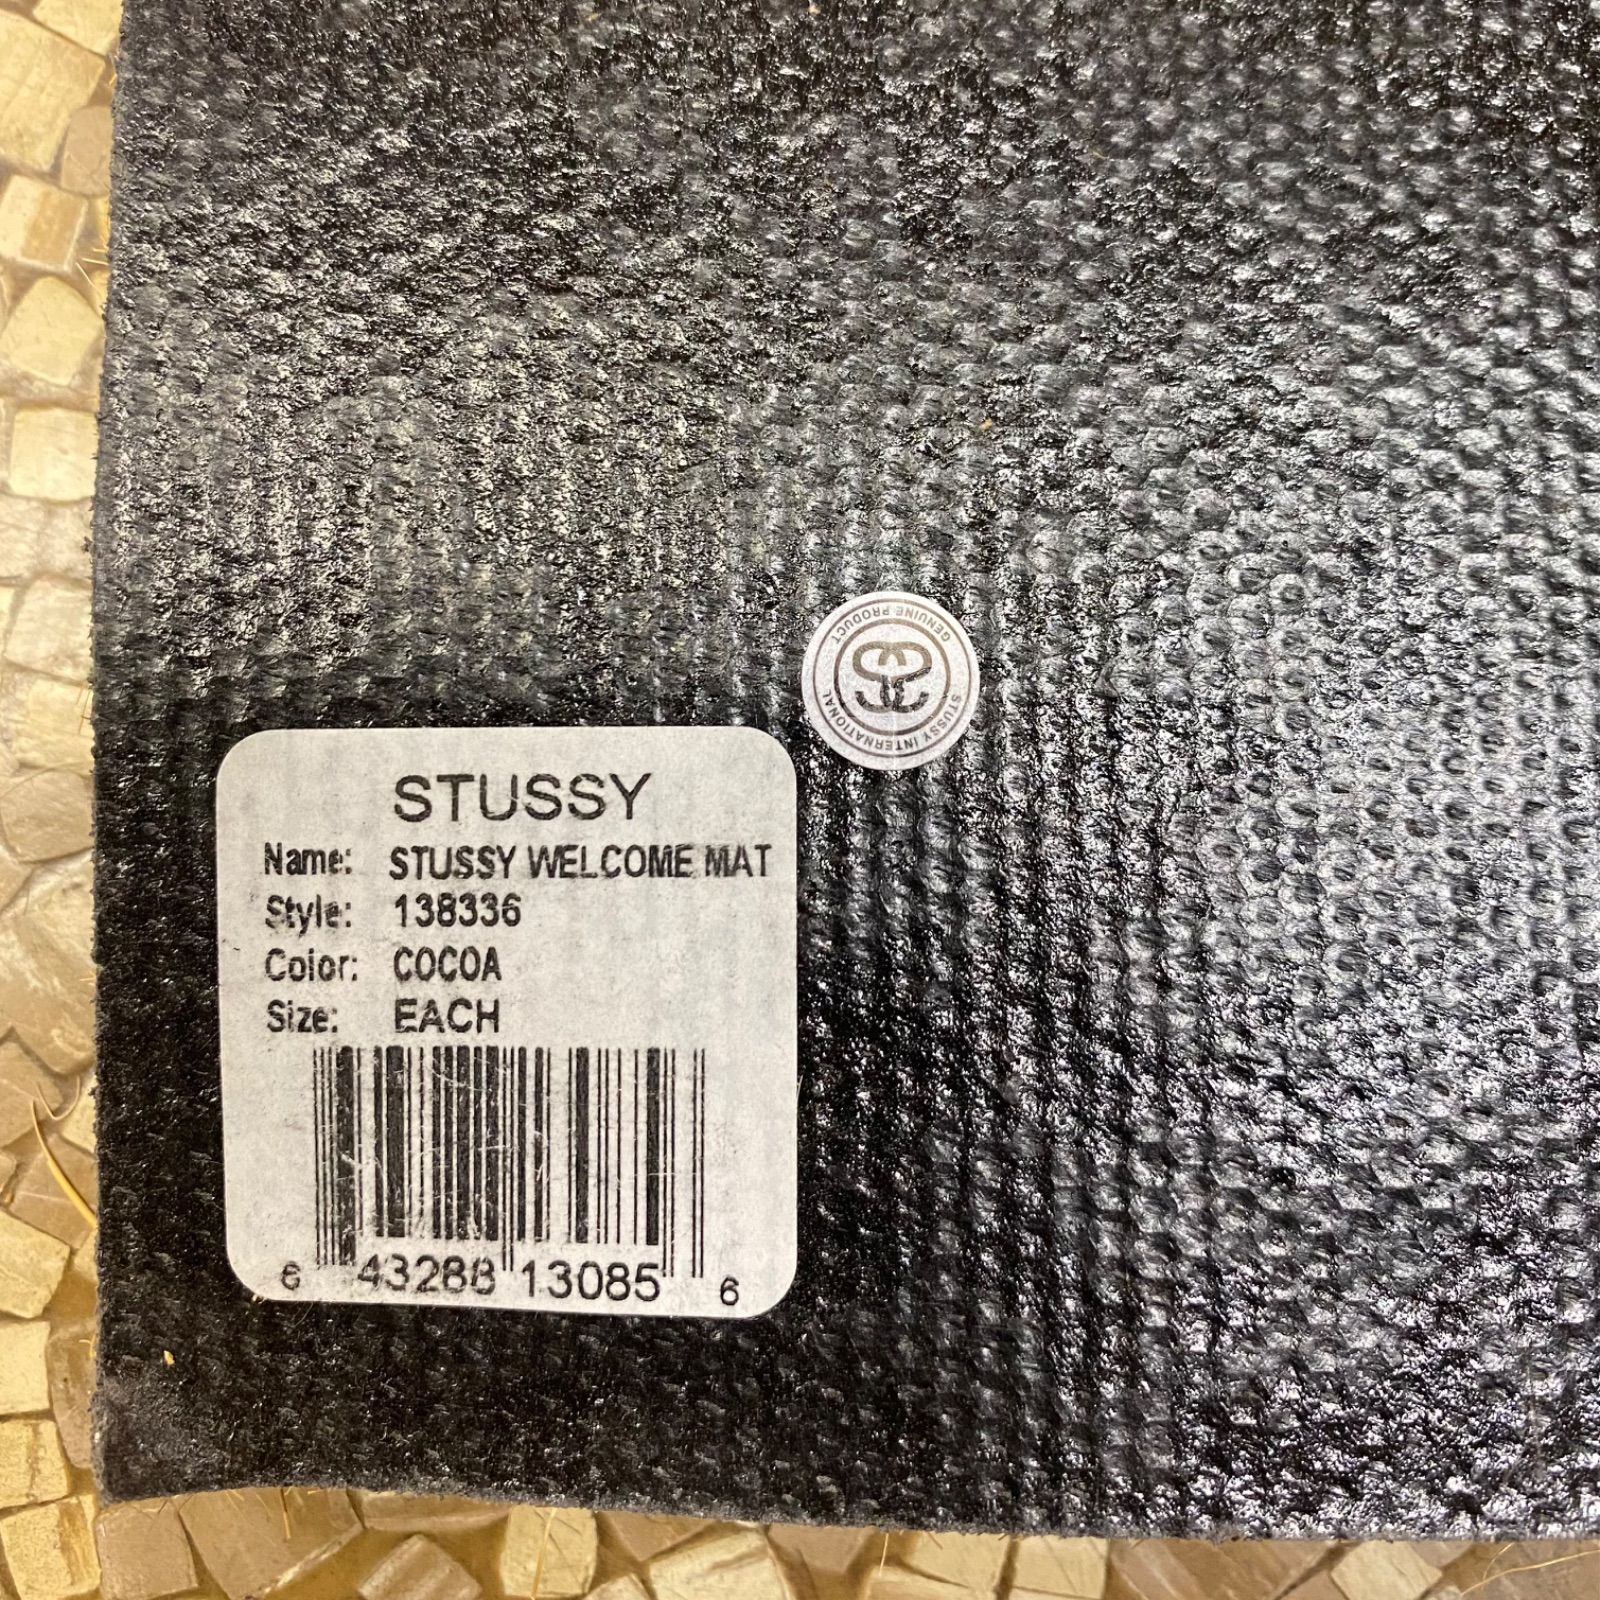 Stussy Welcome Mat cocoa ラグ マット新品未使用